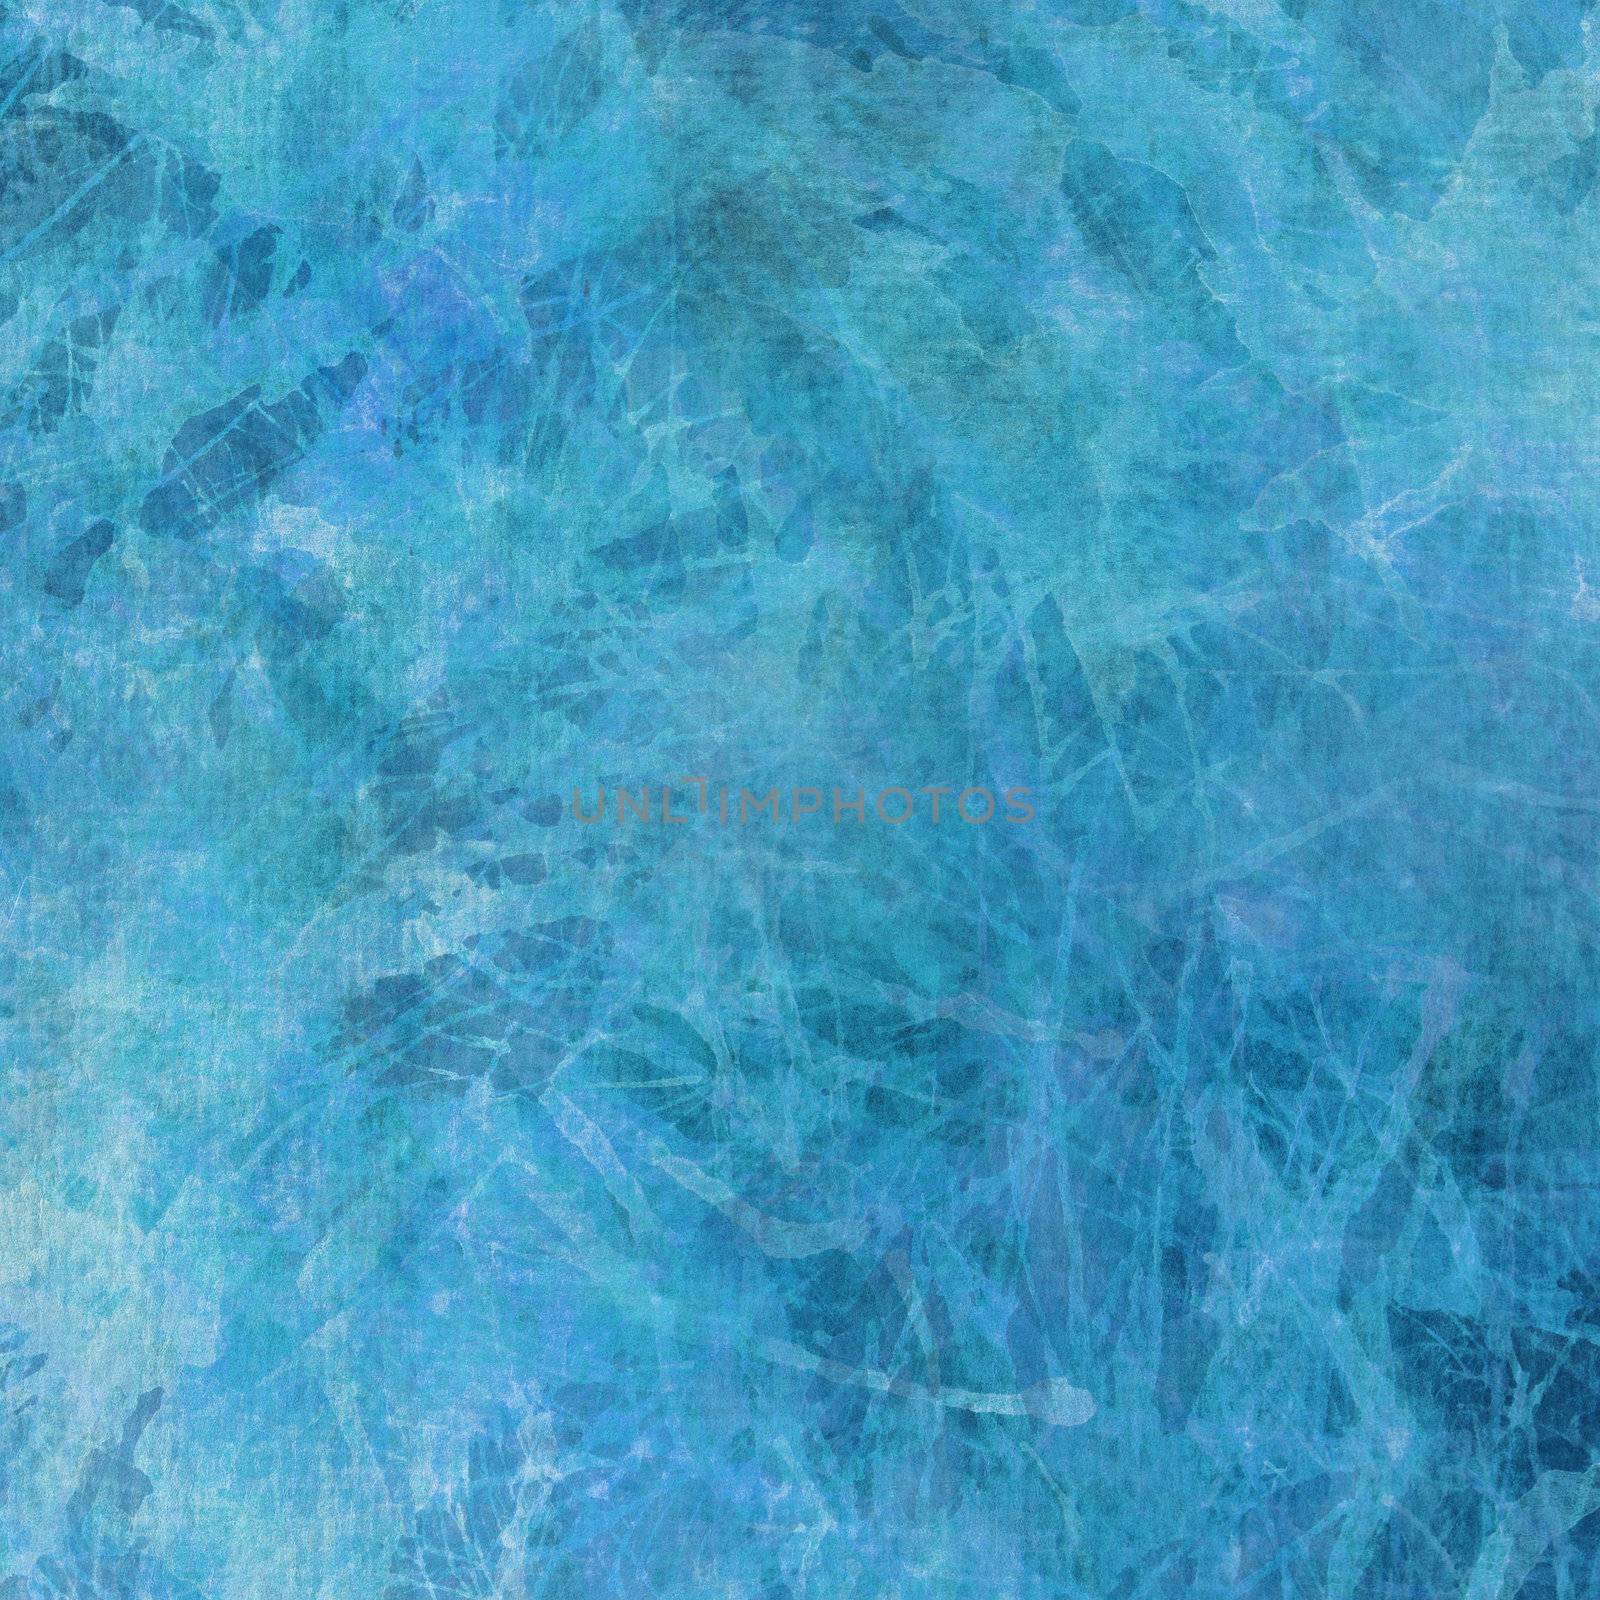 Abstract artistic painterly blue background texture.